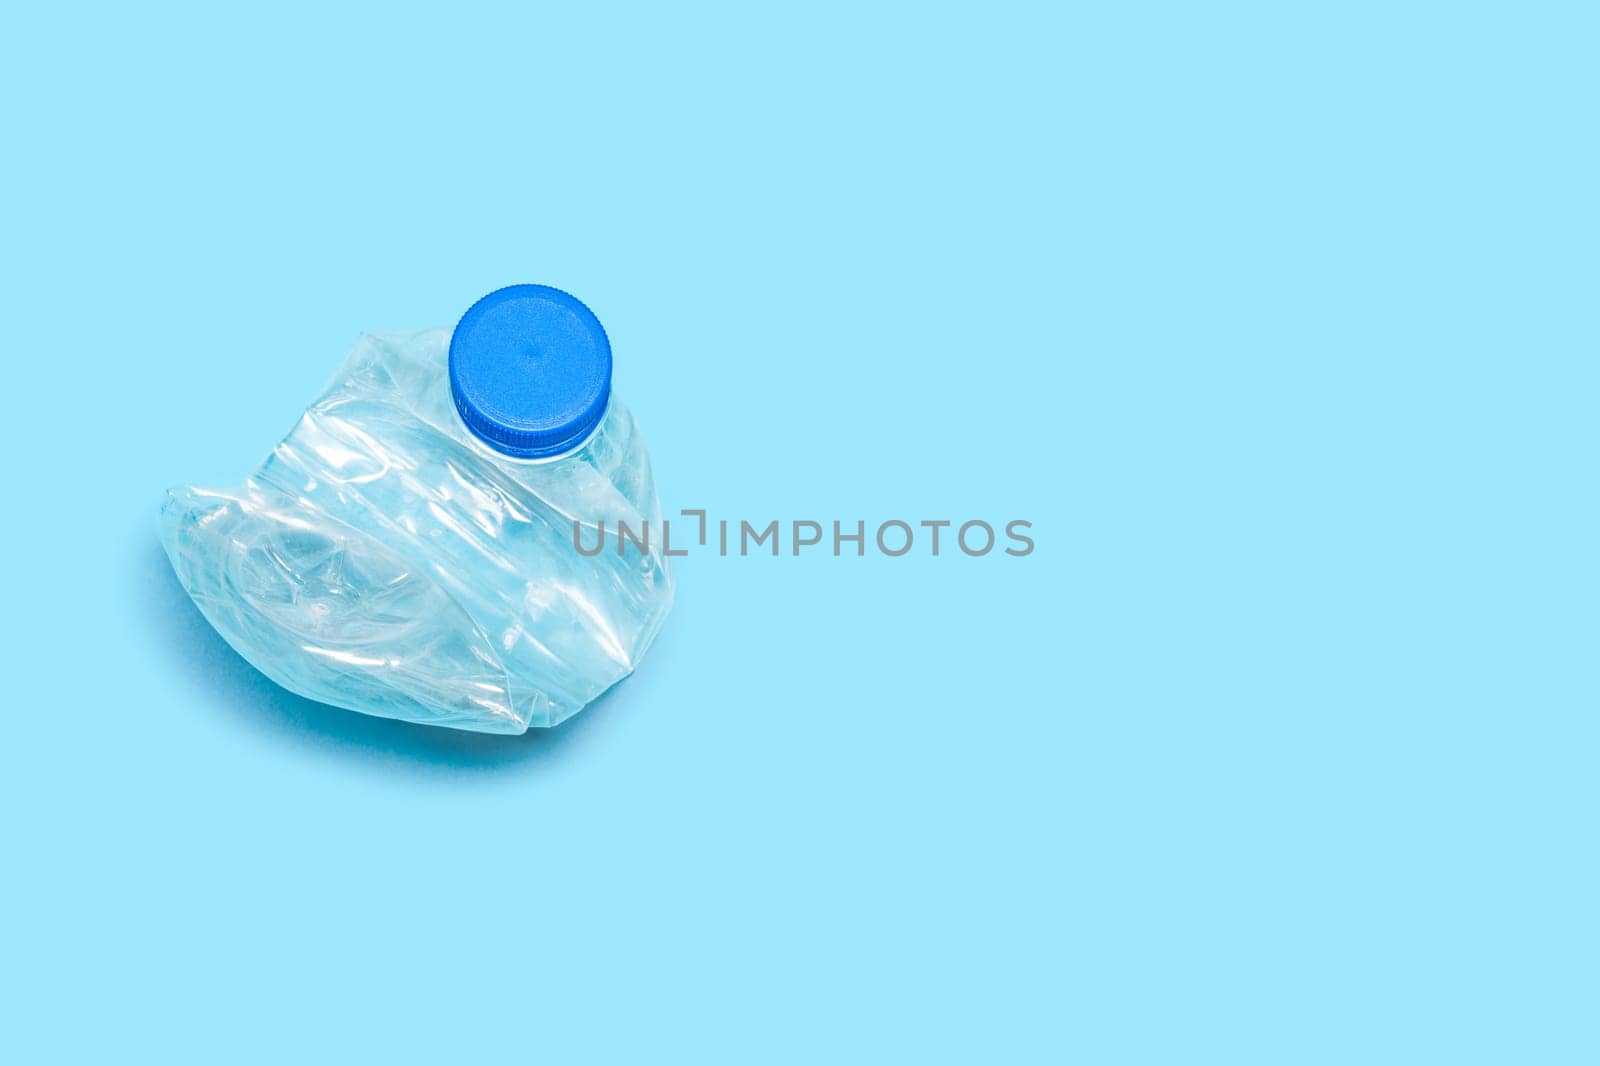 One used bottle PET plastic recycling concept. Flat plastic bottle recycling design blue background. Single crushed bottle crumpled plastic garbage PET recycling background top view by synel